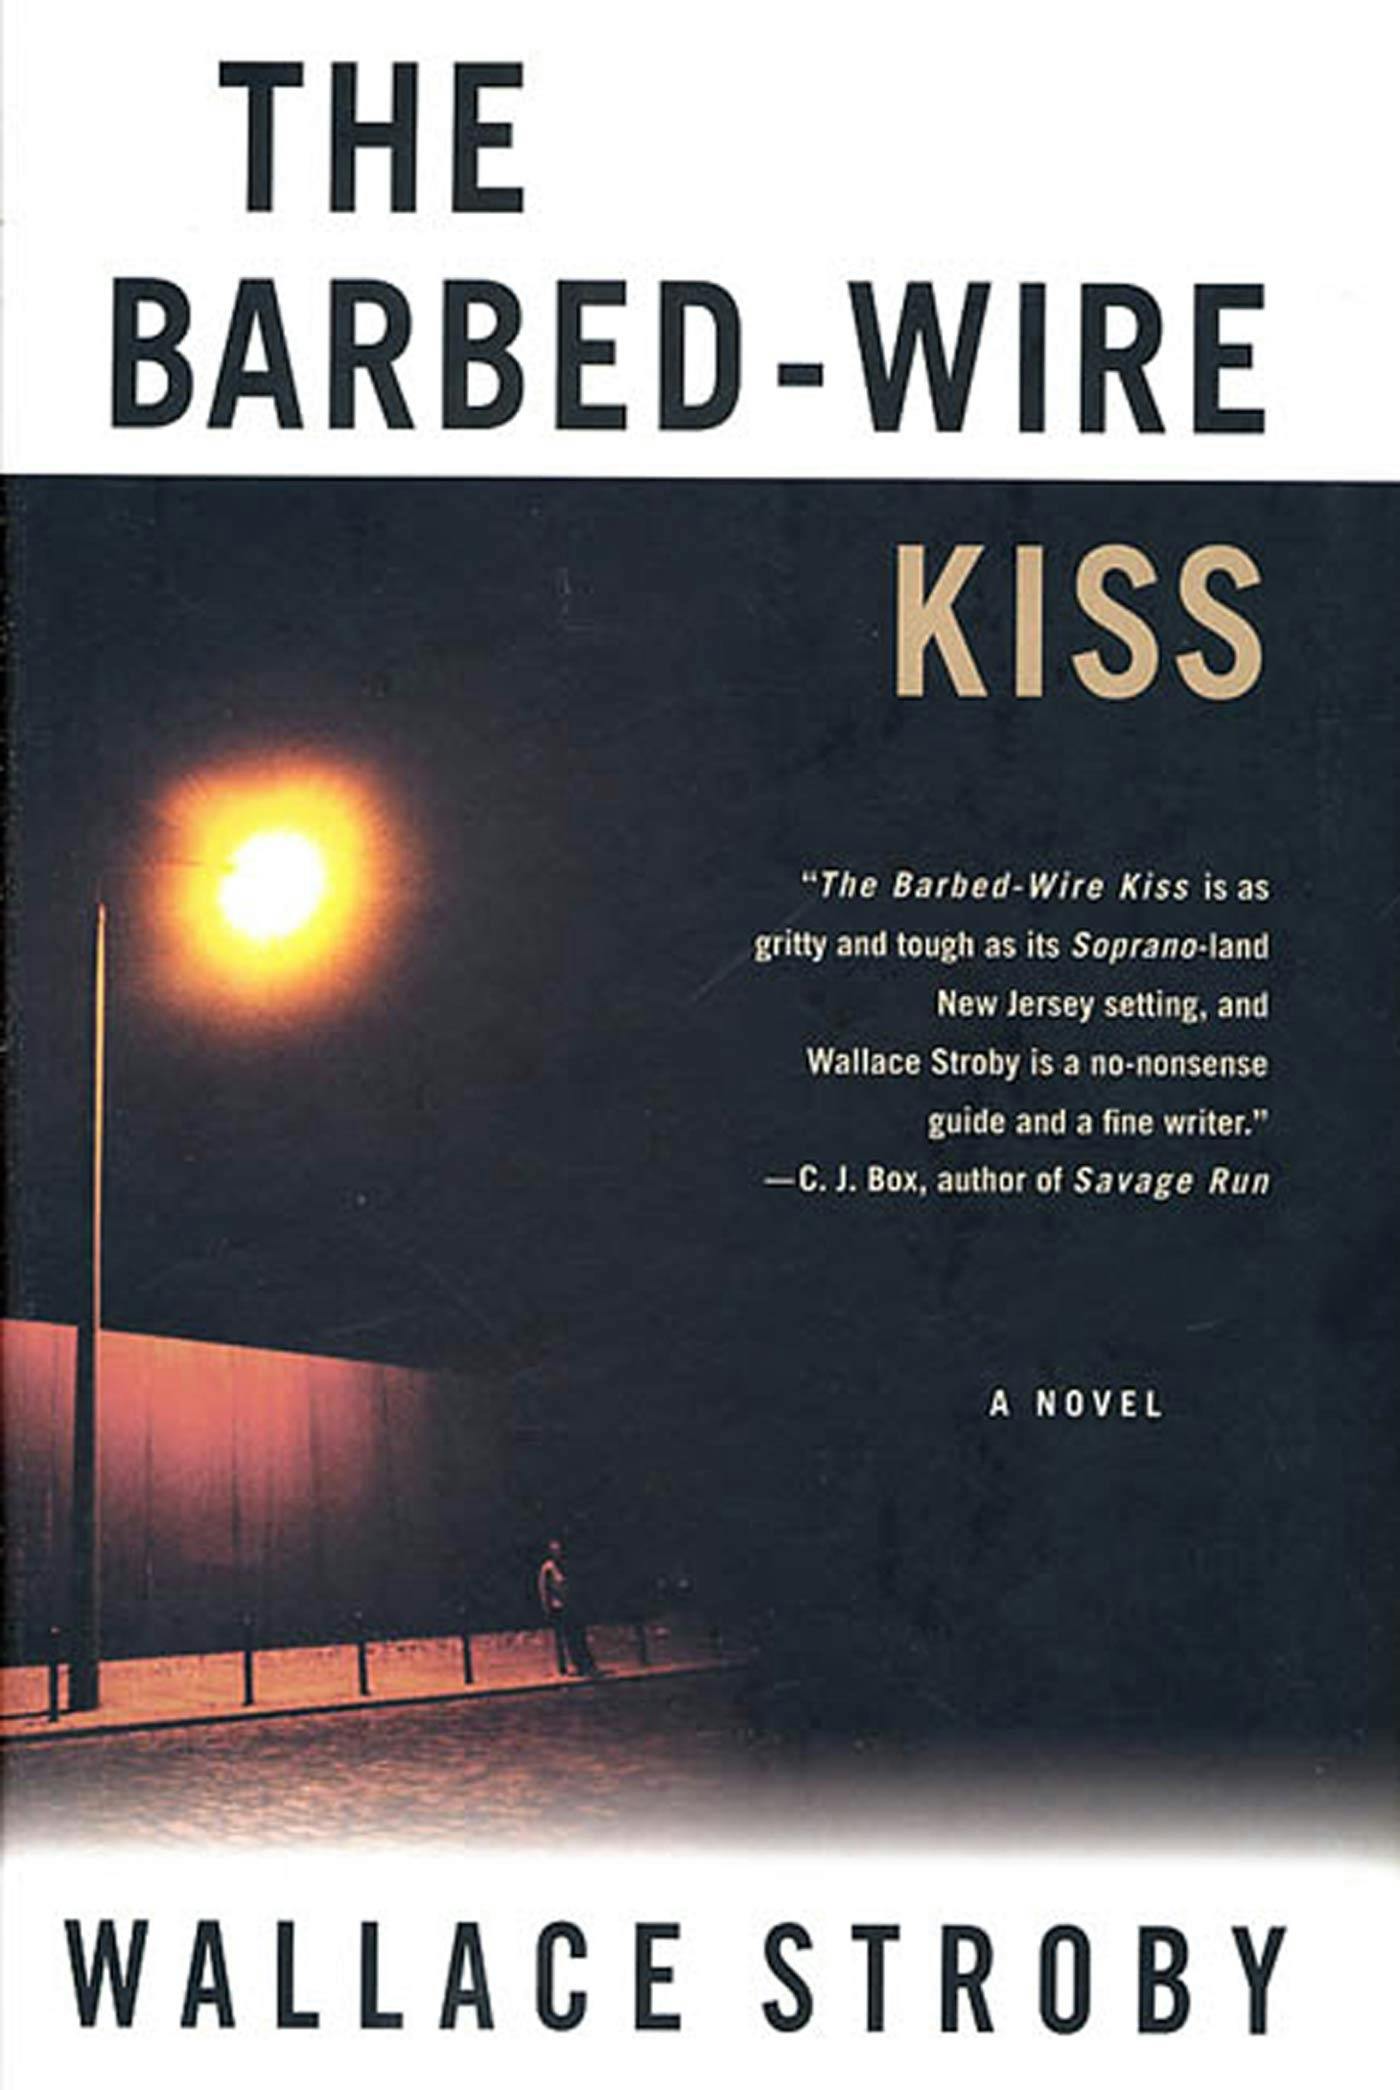 Image of The Barbed-Wire Kiss